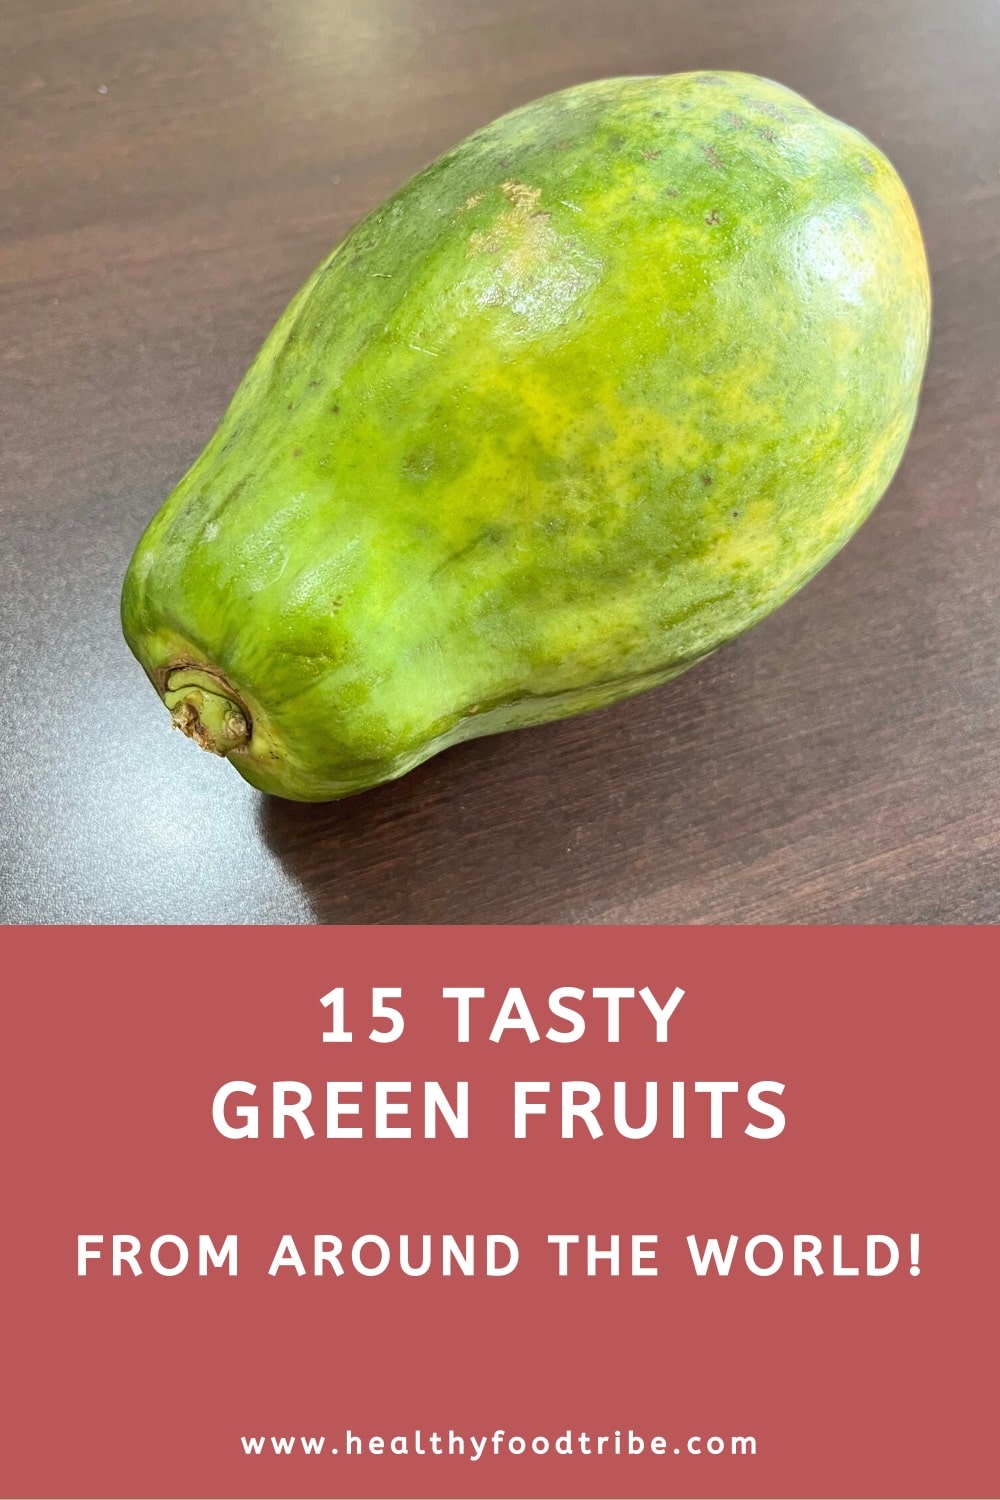 15 Tasty green fruits from around the world